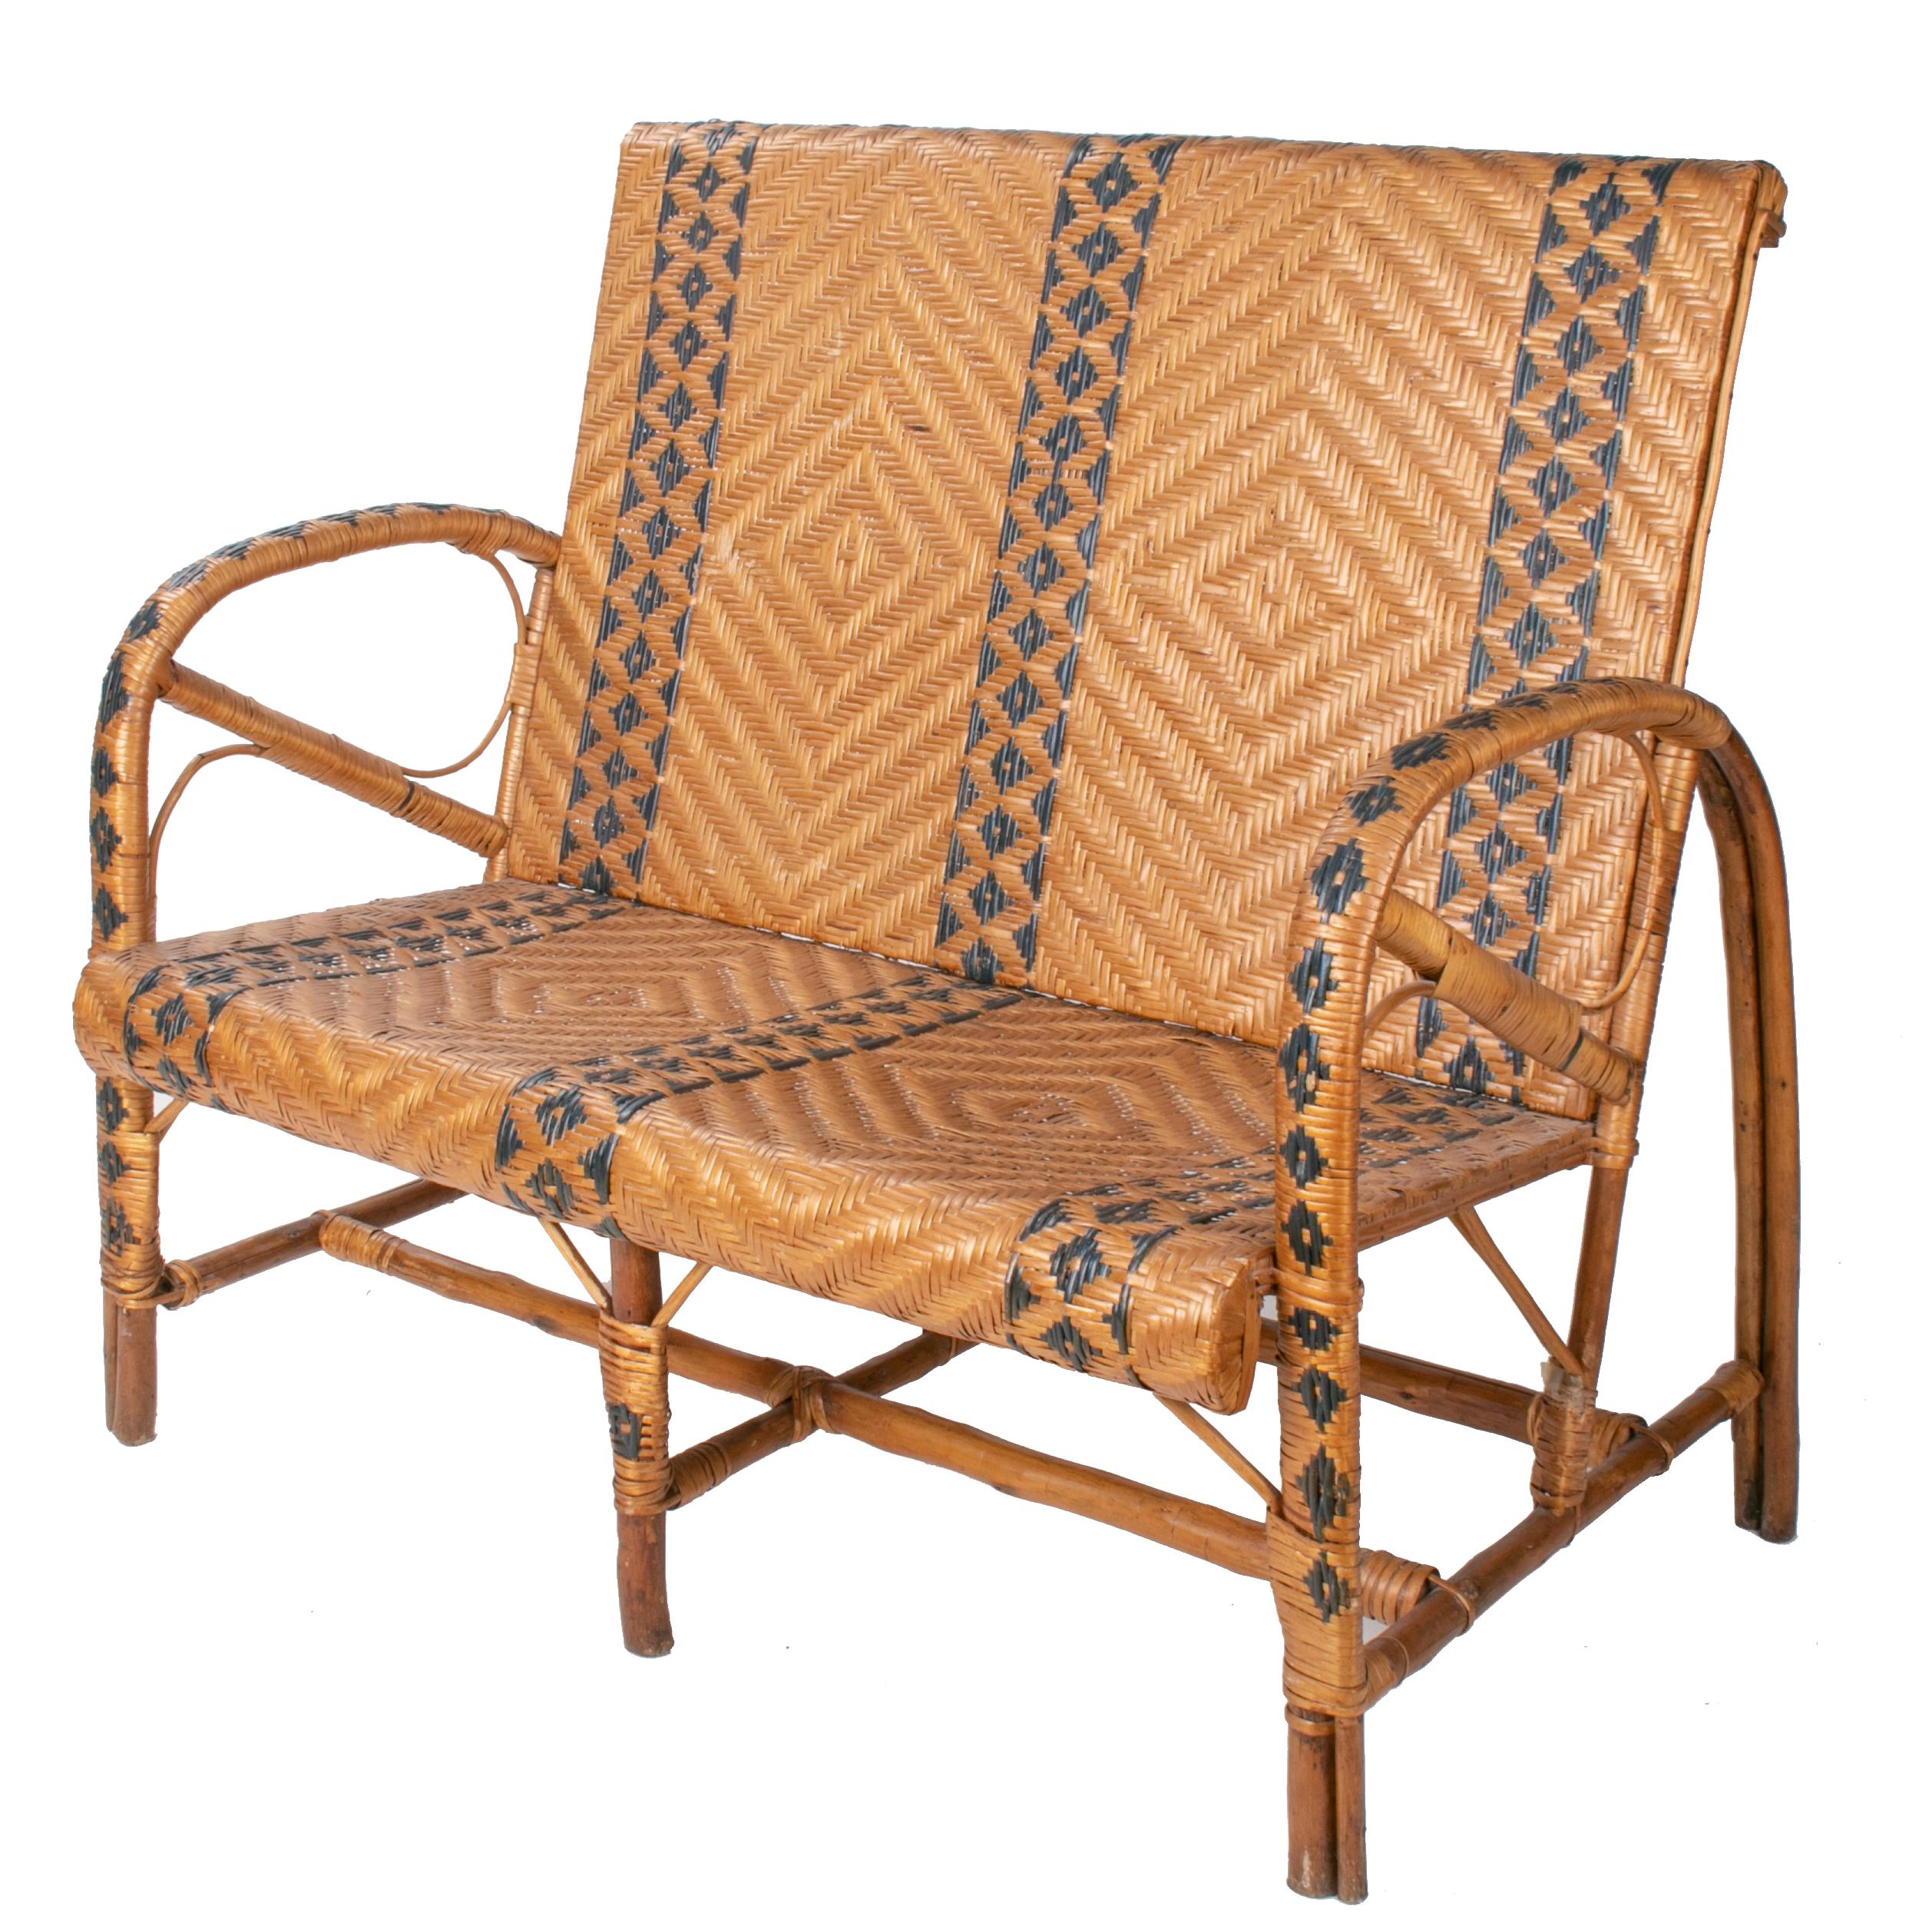 1970s Spanish bamboo and wicker two-tone set comprised of three armchairs, a sofa and a table. Geometric decoration that extends from top to the base of the legs.

Dimensions:
Armchairs 90 cm height, 52 cm length, 58 cm width
Table 67 cm height,